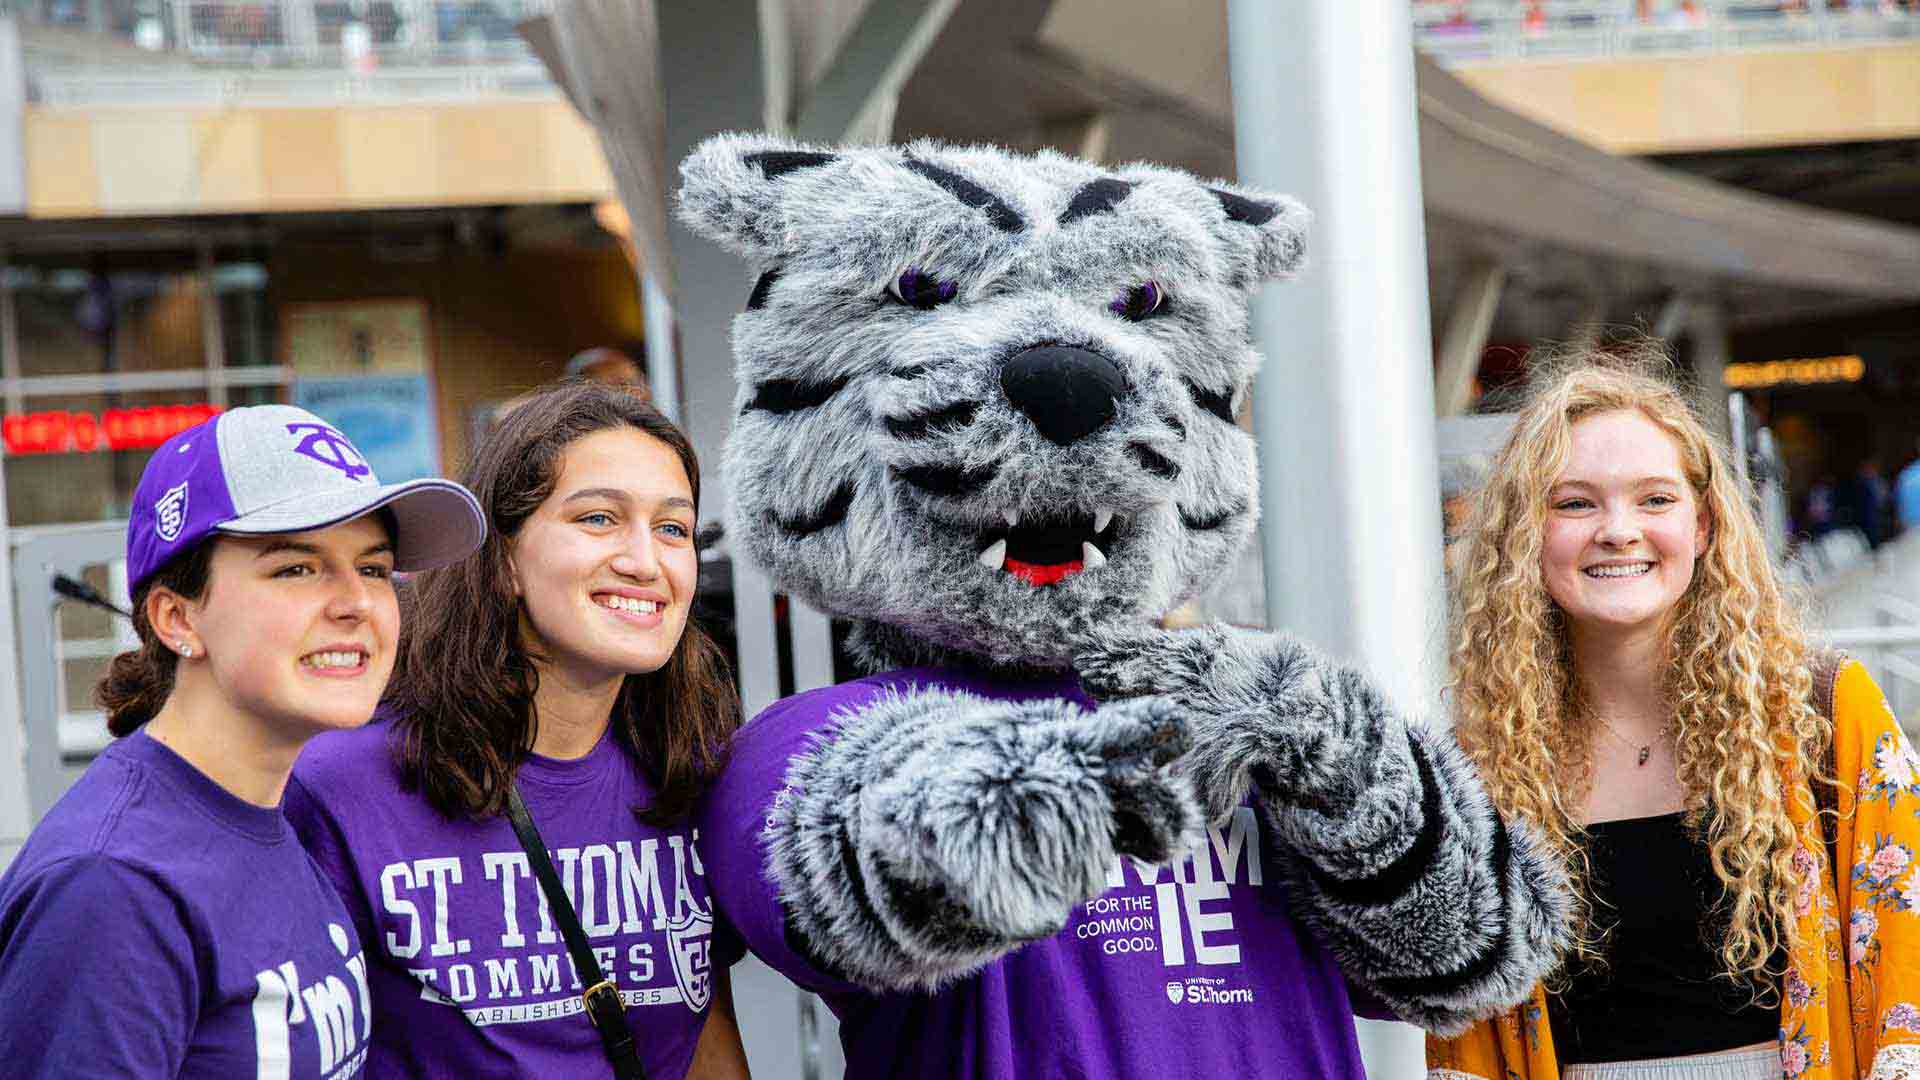 Tommie the Mascot and St. Thomas students at Minnesota Twins Game at Target Field